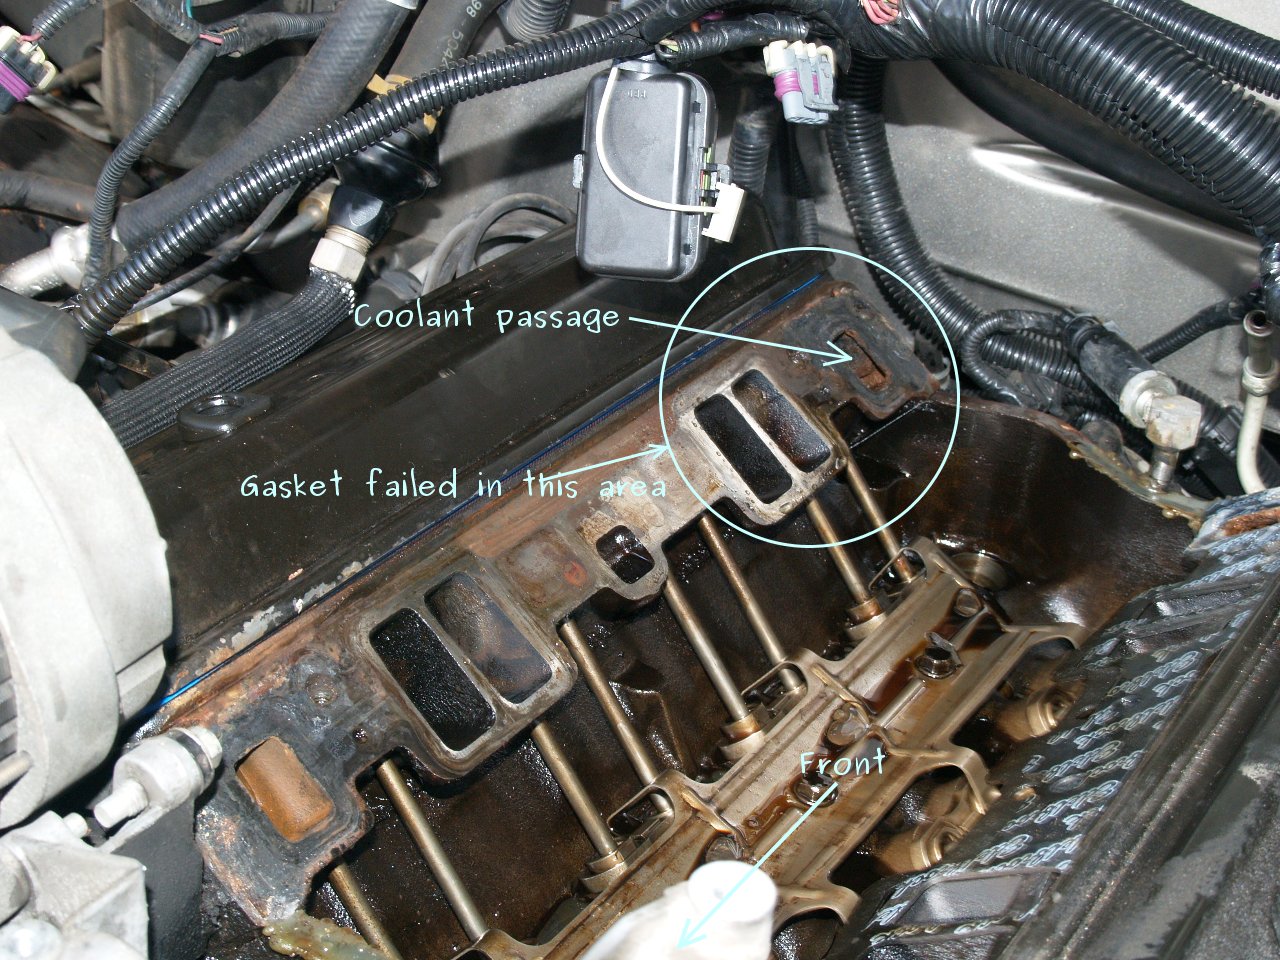 See C3160 in engine